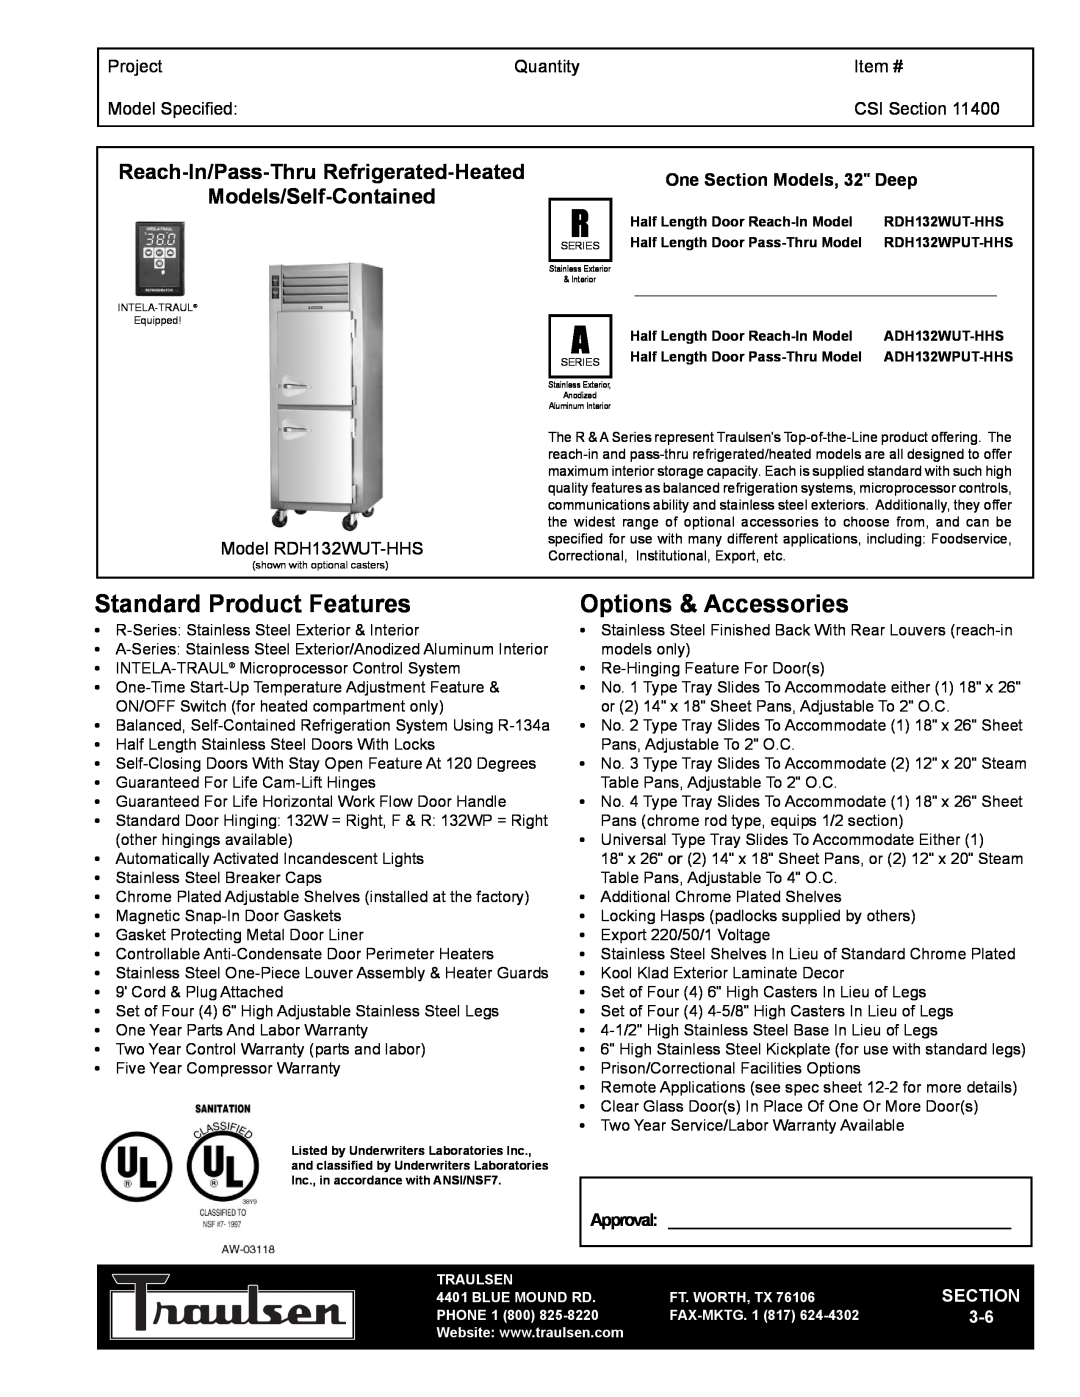 Traulsen TR35784 warranty Reach-In/Pass-Thru Refrigerated-Heated, Models/Self-Contained, Project, Quantity, Item # 